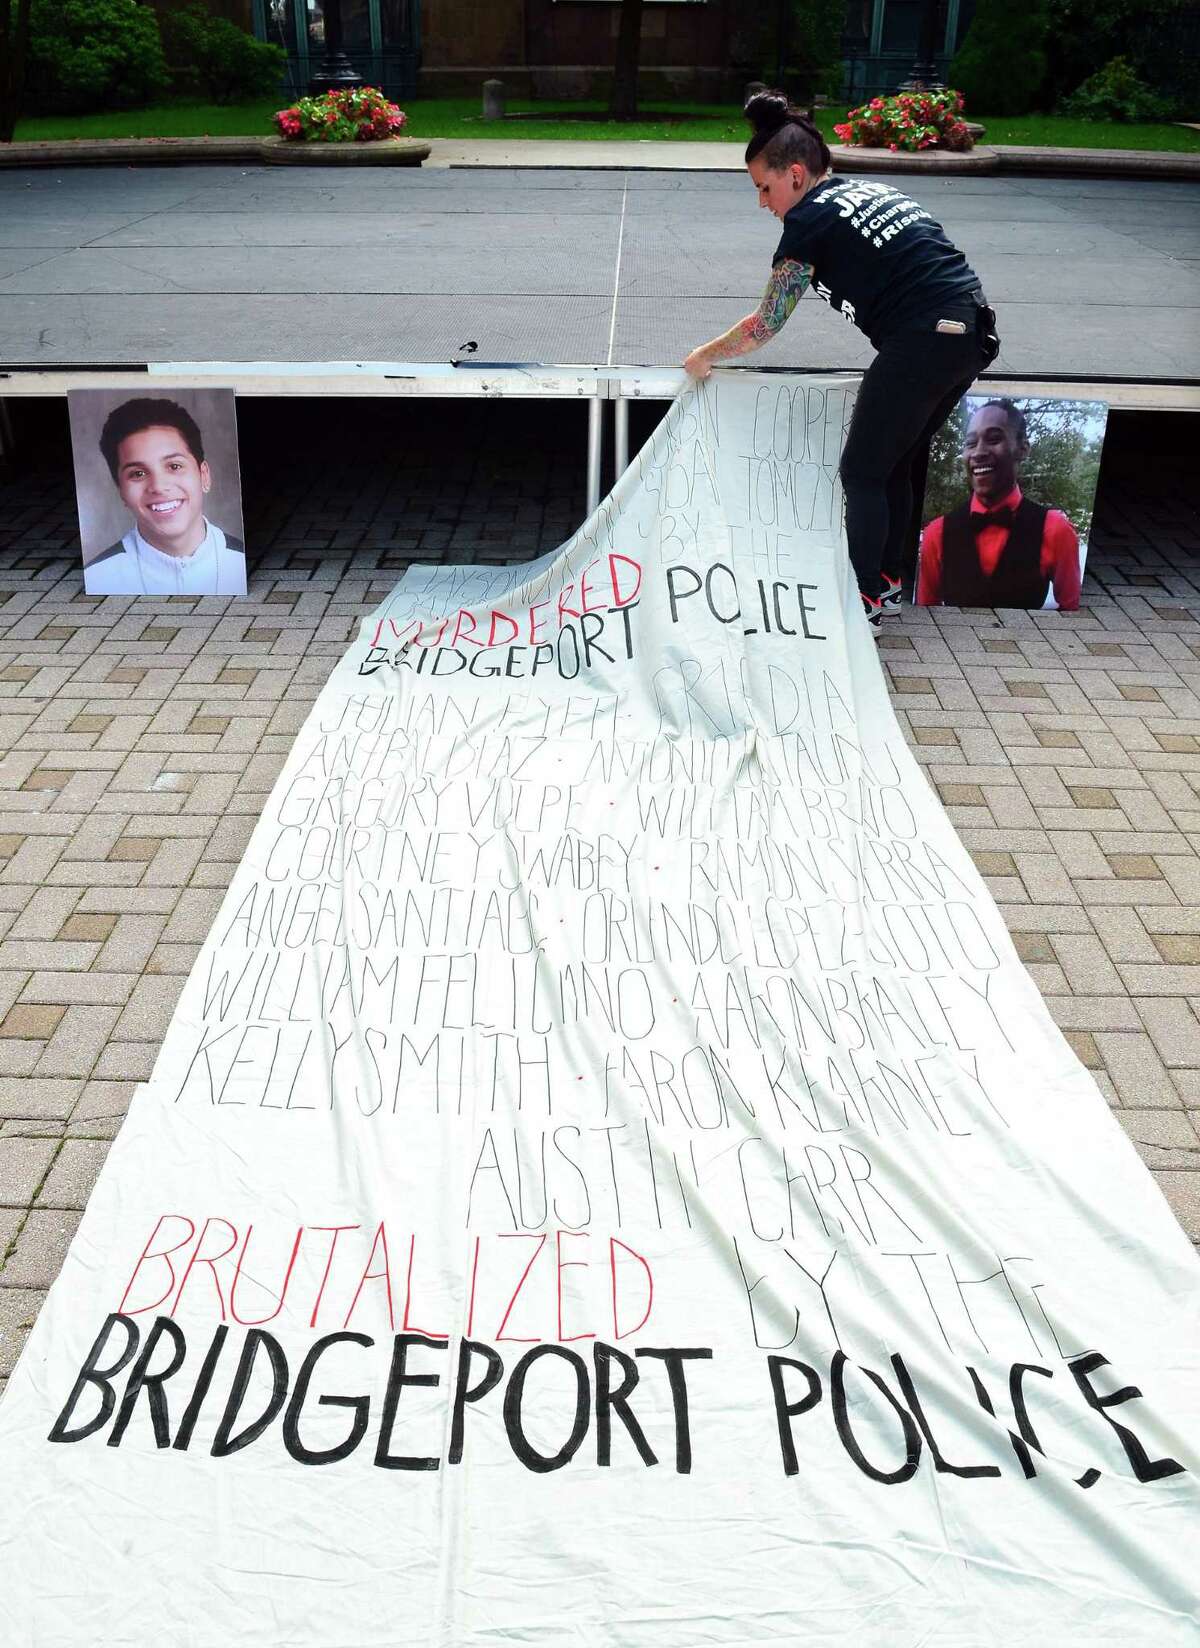 Sarah Pimento, with the Justice for Jayson Coalition, works on securing a banner made for a rally organized by the coallition and Bridgeport Generation Now at McLevy Green in downtown Bridgeport, Conn., on Friday Sept. 14, 2018. Participants remembered Negron, who was killed in a shooting by the Bridgeport Police last May, as well as several others who attendees said were murdered or brutalized by police.